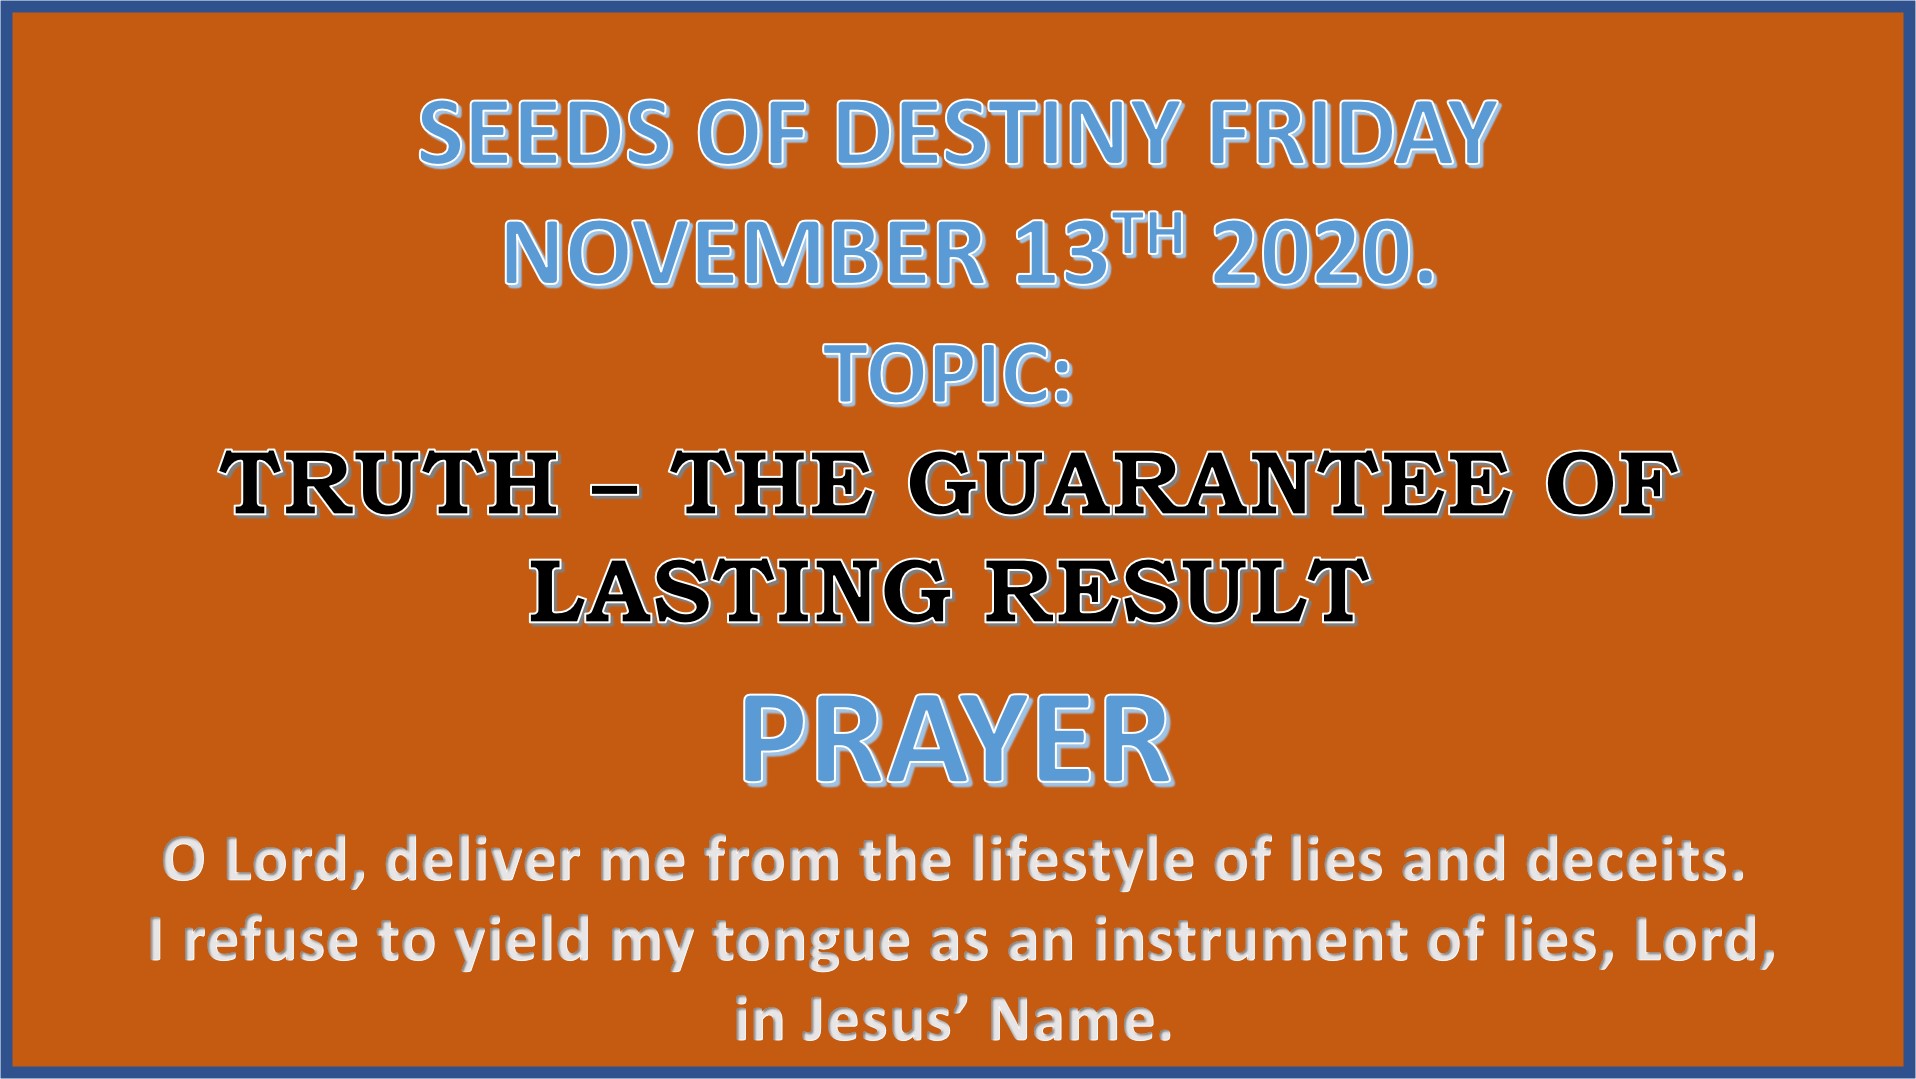 Seeds of Destiny Friday 13th November 2020 by Dr Paul Enenche